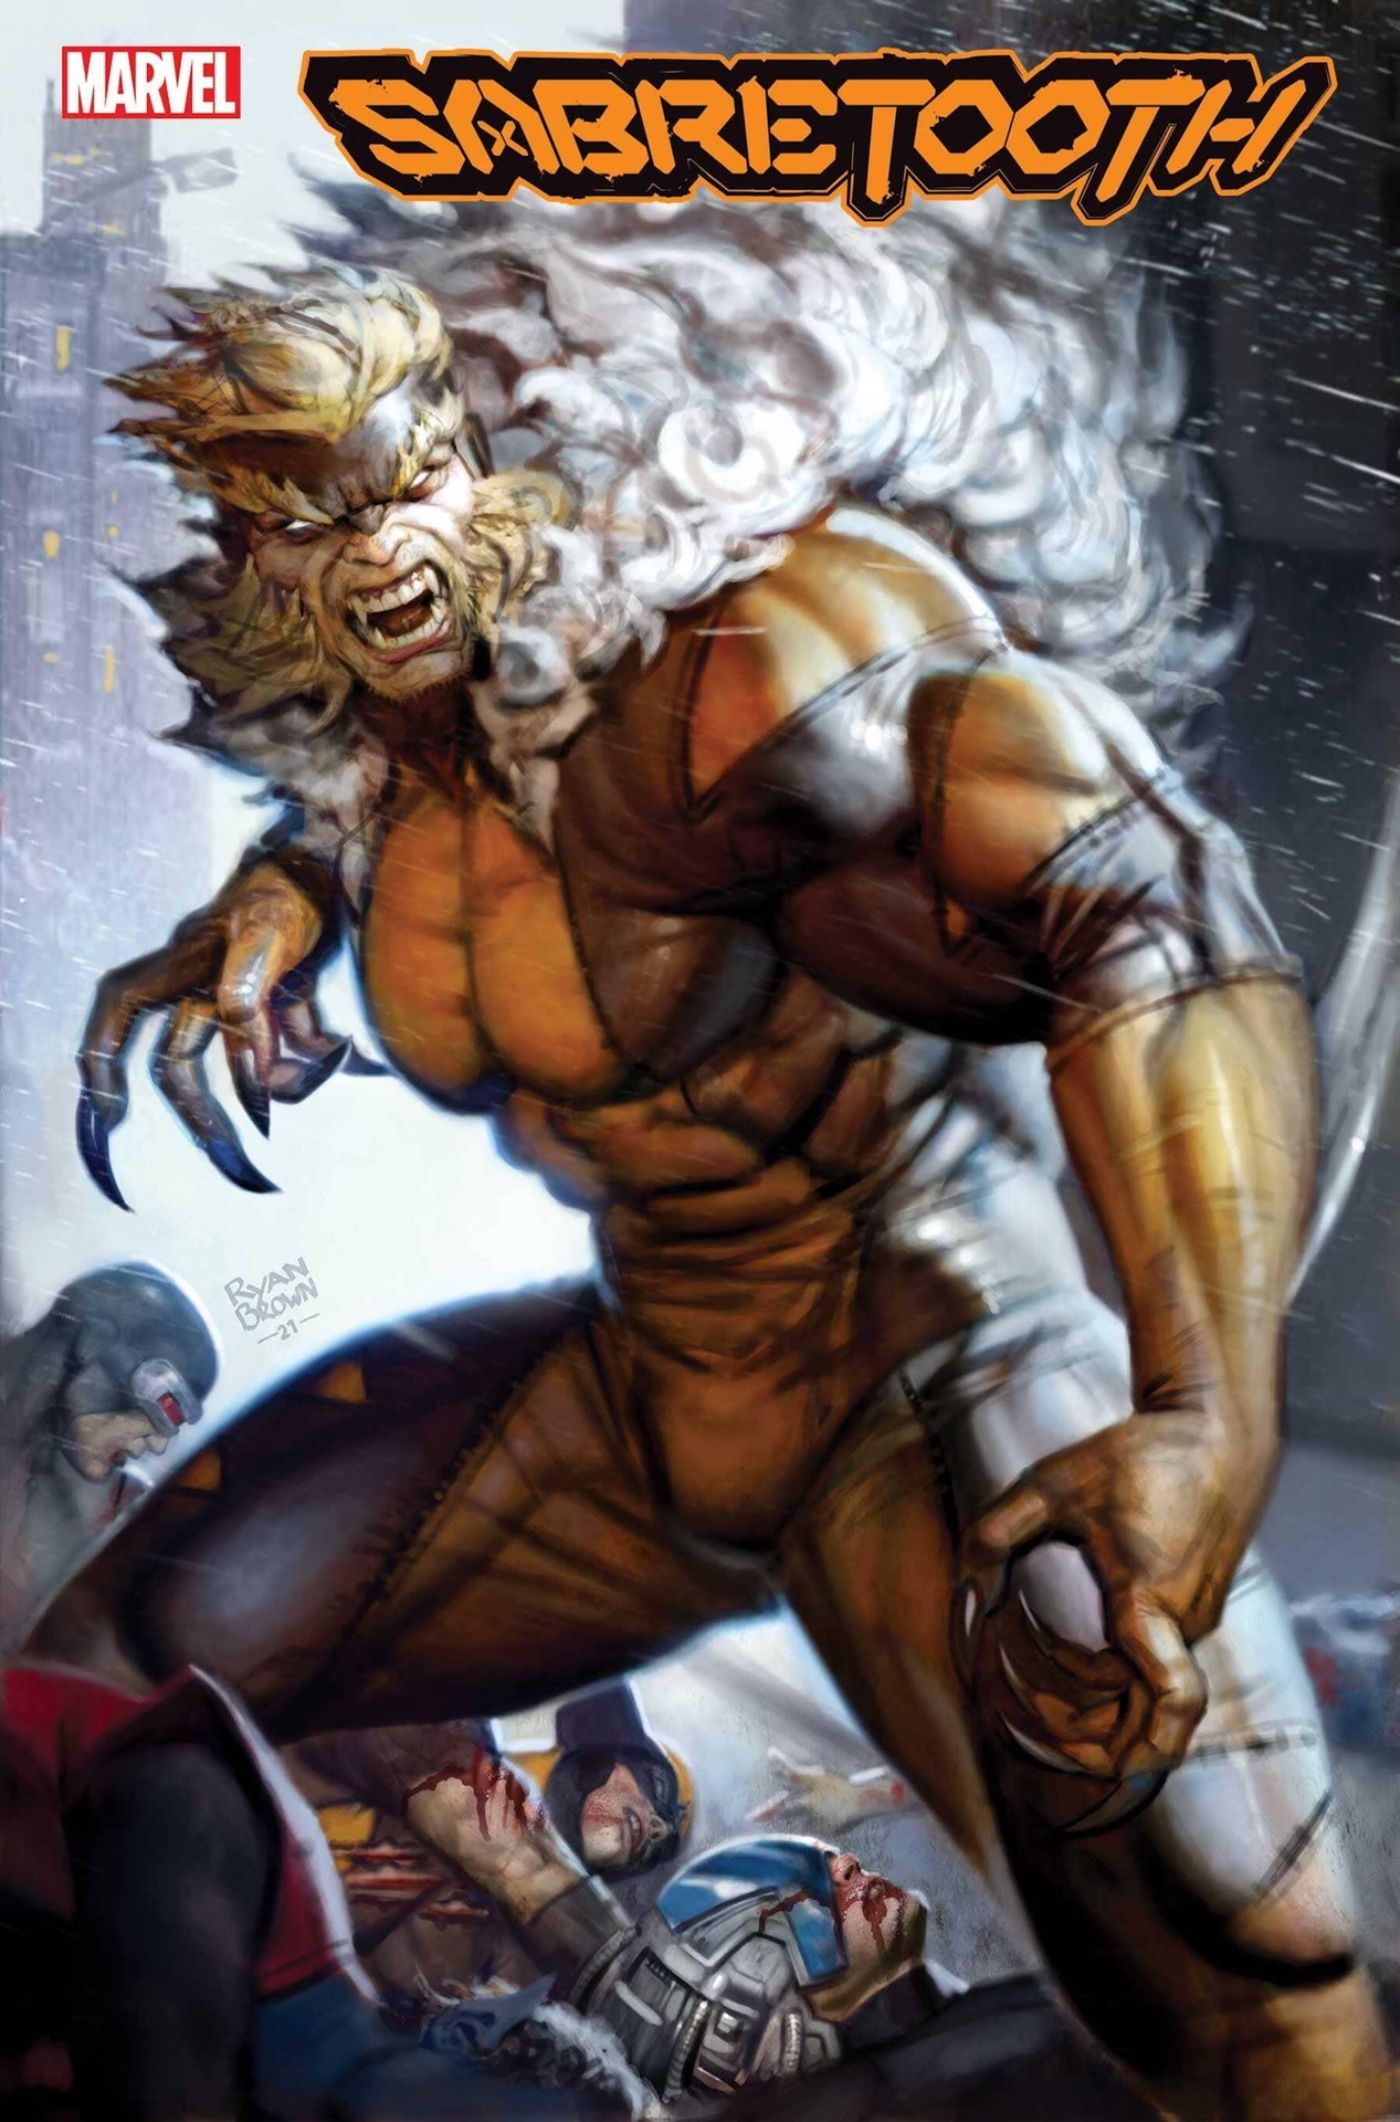 New Cover Shows Sabretooth Slaughtering the X-Men, and They Deserve It